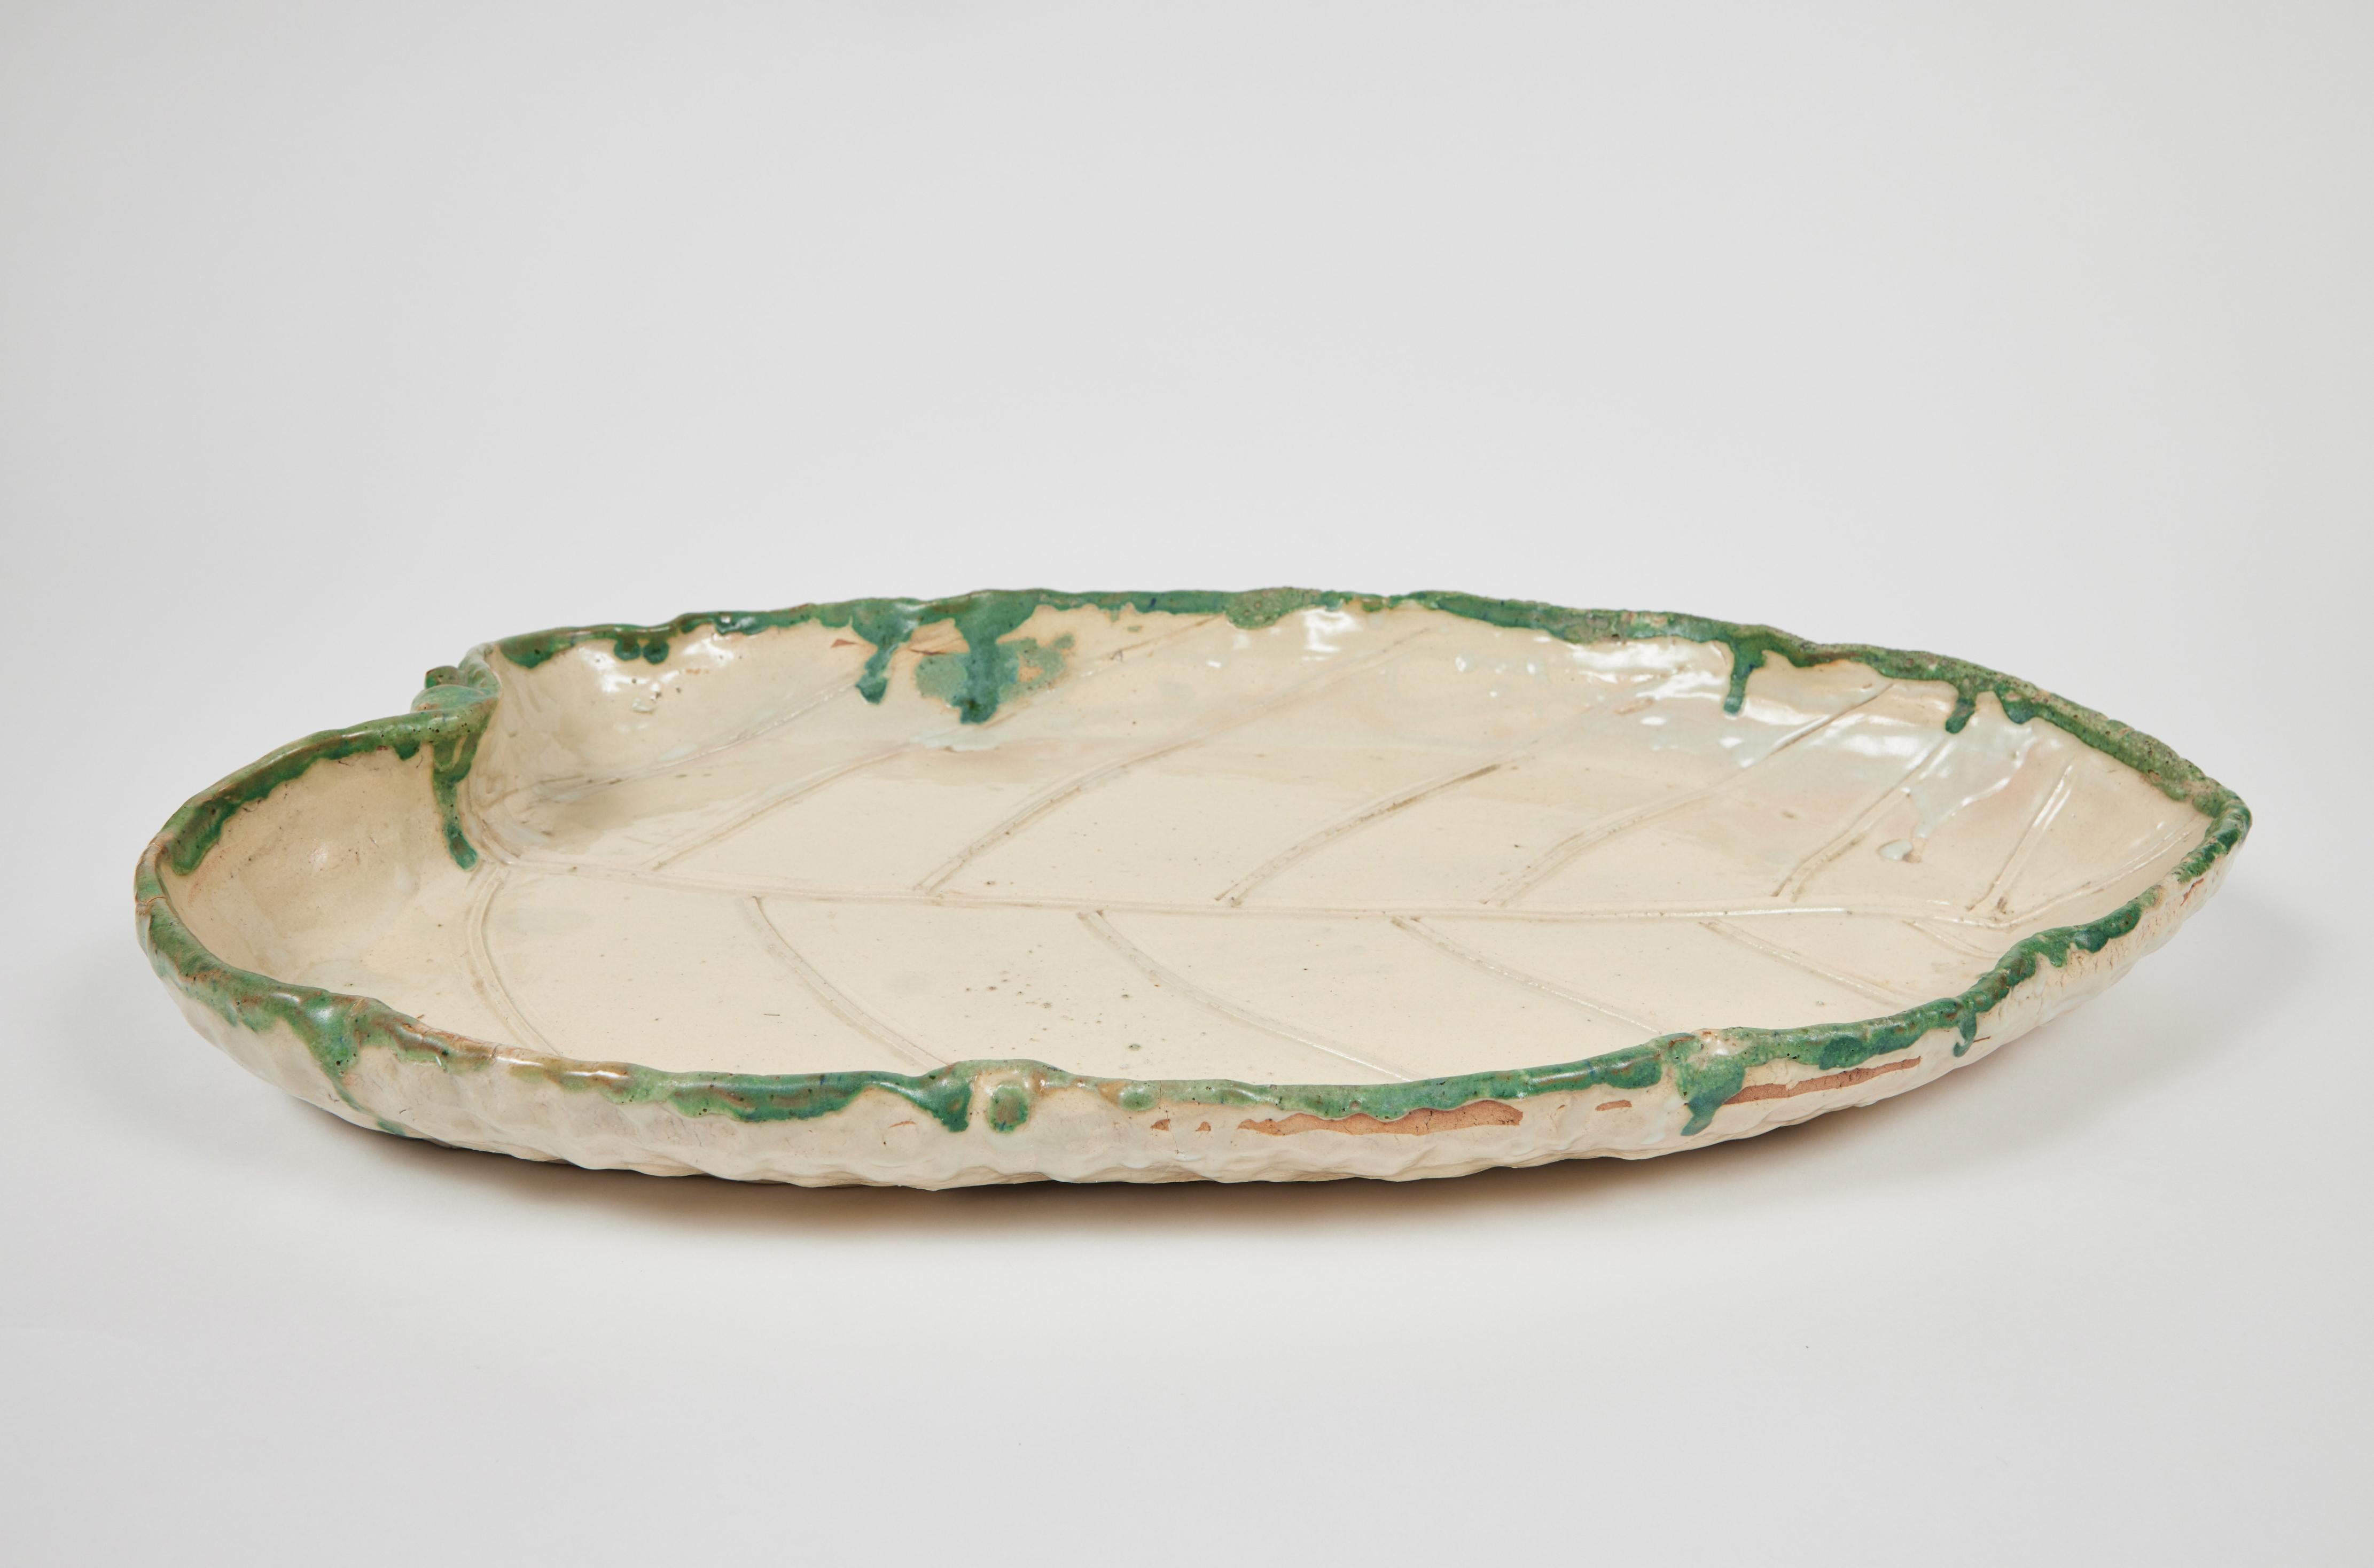 Rustic large vintage Japanese pottery leaf tray is handmade and glazed in a simple and natural fashion.
It mimics the real leaf with a fantastic ability for function.

(Not Food Safe).